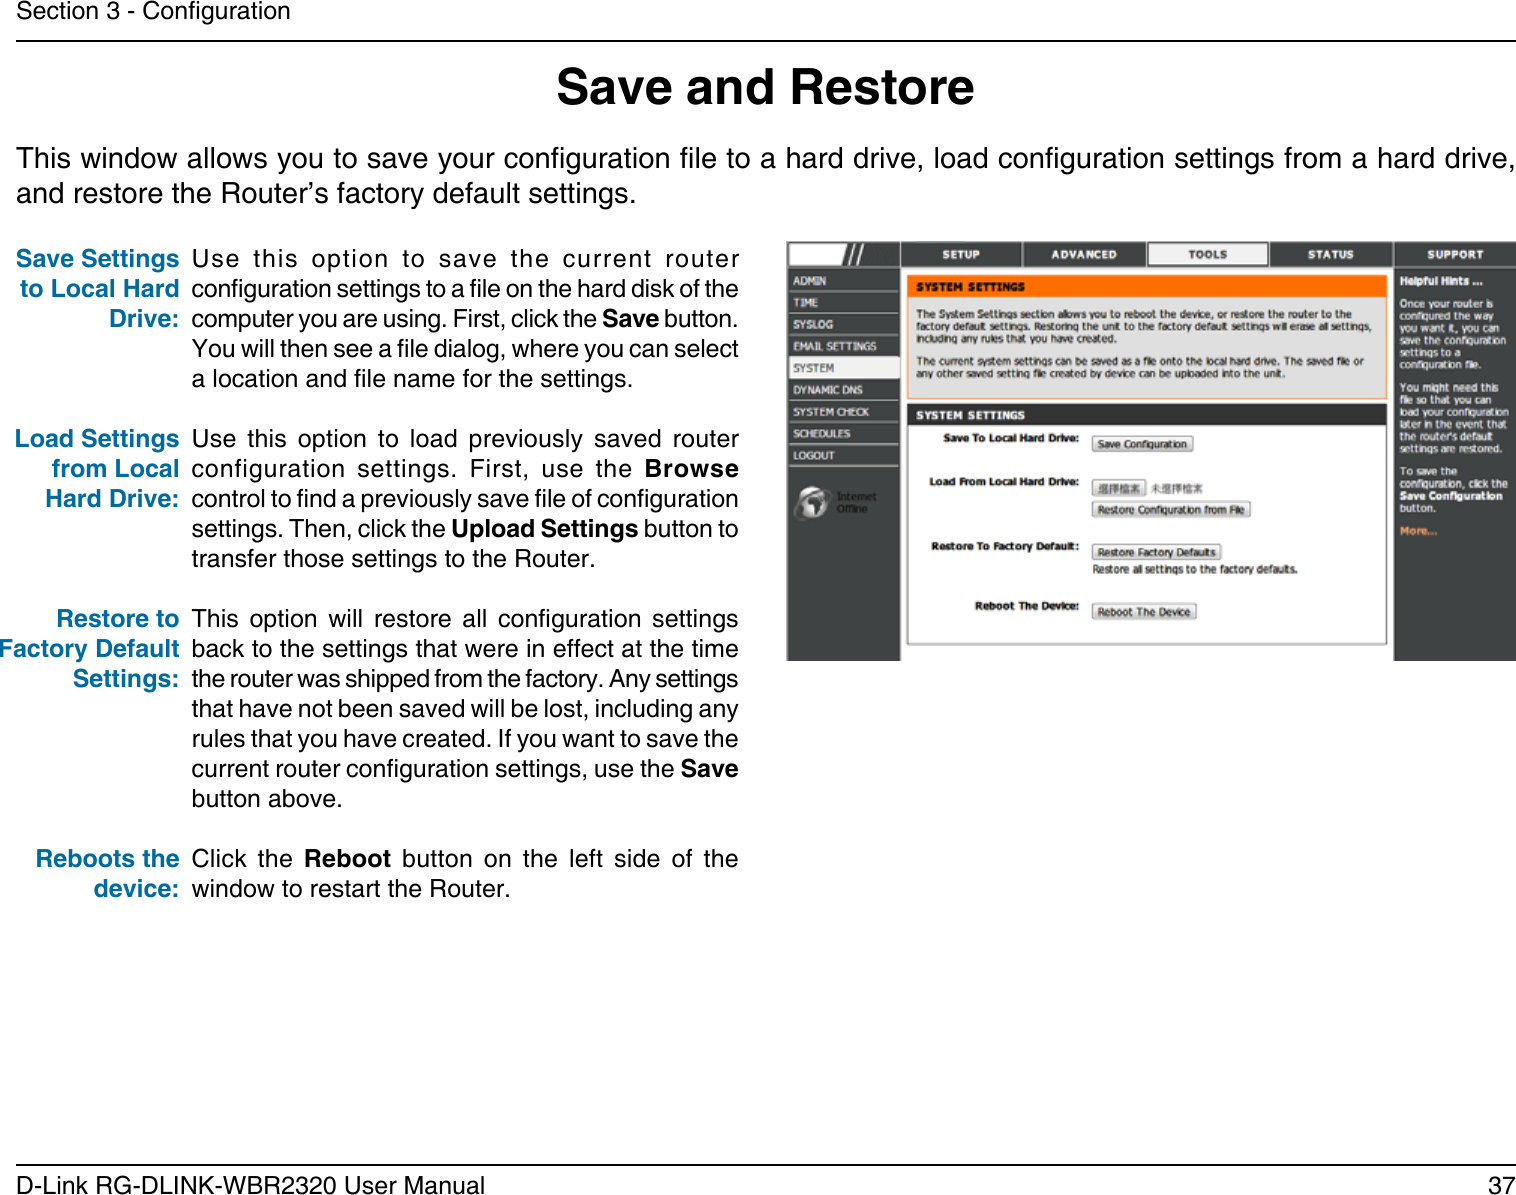 37D-Link RG-DLINK-WBR2320 User ManualSection 3 - CongurationSave and RestoreUse  this  option  to  save  the  current  router conguration settings to a le on the hard disk of the computer you are using. First, click the Save button. You will then see a le dialog, where you can select a location and le name for the settings. Use  this  option  to  load  previously  saved  router configuration  settings.  First,  use  the  Browse control to nd a previously save le of conguration settings. Then, click the Upload Settings button to transfer those settings to the Router. This  option  will  restore  all  conguration  settings back to the settings that were in effect at the time the router was shipped from the factory. Any settings that have not been saved will be lost, including any rules that you have created. If you want to save the current router conguration settings, use the Save button above. Click  the  Reboot  button  on  the  left  side  of  the window to restart the Router.Save Settings to Local Hard Drive:Load Settings from Local Hard Drive:Restore to Factory Default Settings:Reboots the device:This window allows you to save your conguration le to a hard drive, load conguration settings from a hard drive, and restore the Router’s factory default settings.